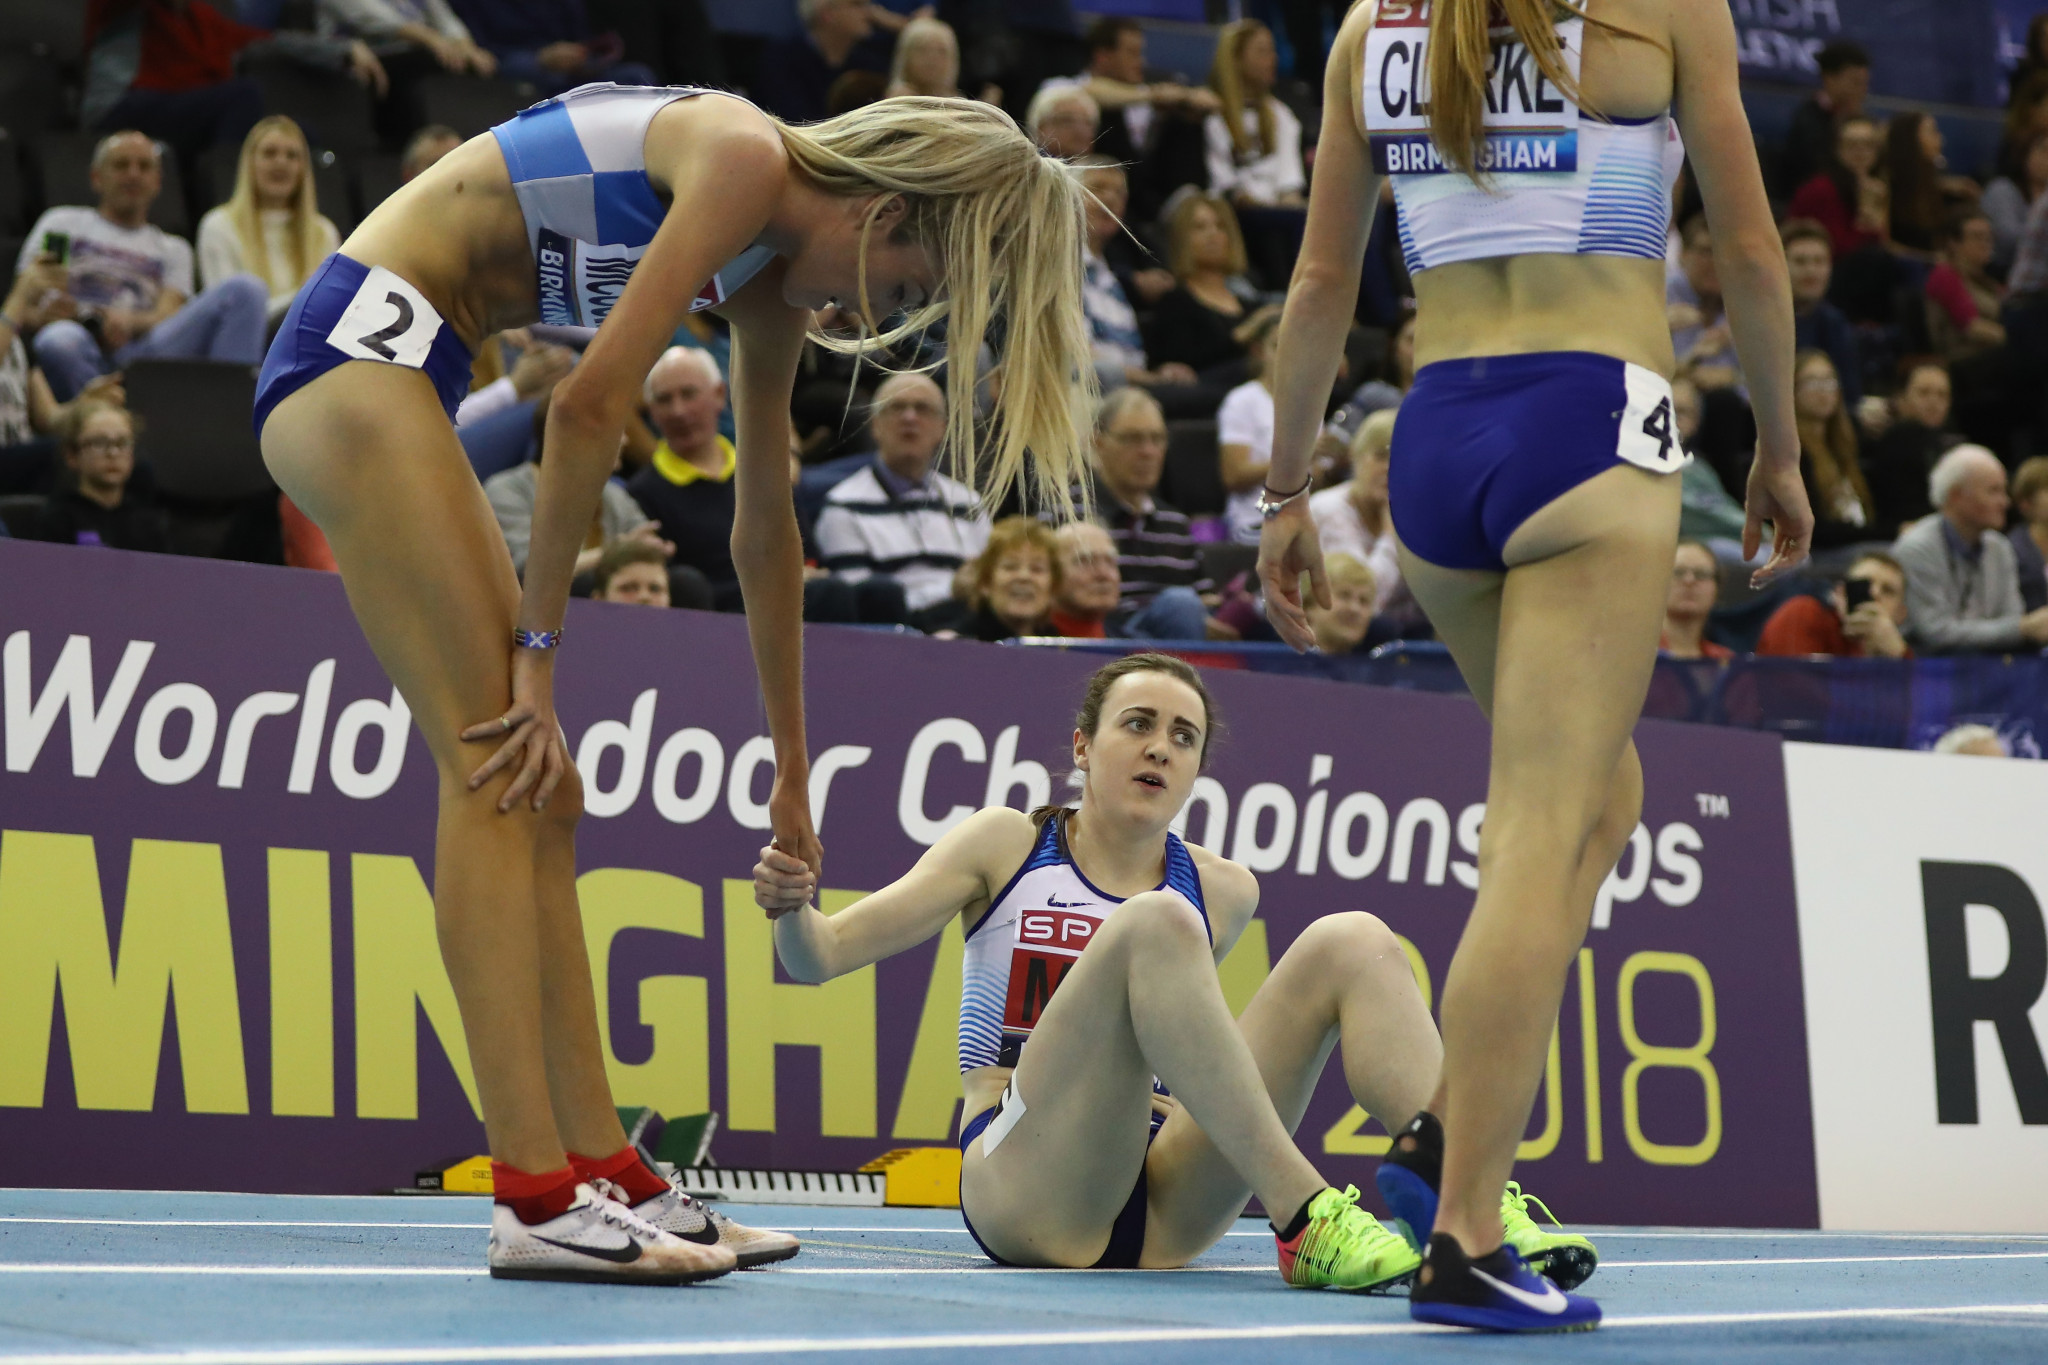 US set for another golden showing at IAAF World Indoor Championships in Birmingham